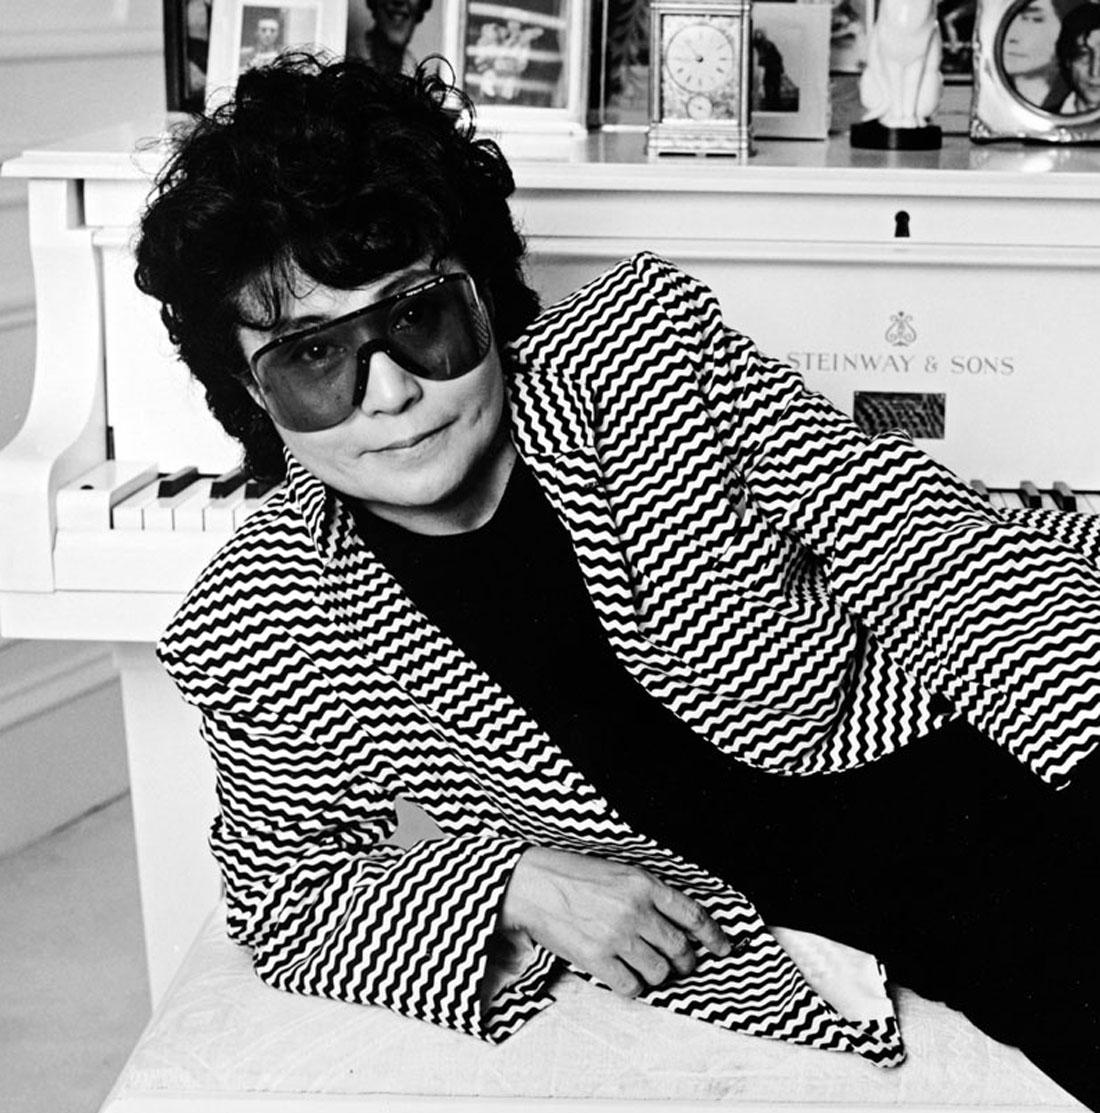 Artist and Musician Yoko Ono photographed at her Dakota apartment in NYC - Photograph by Jack Mitchell